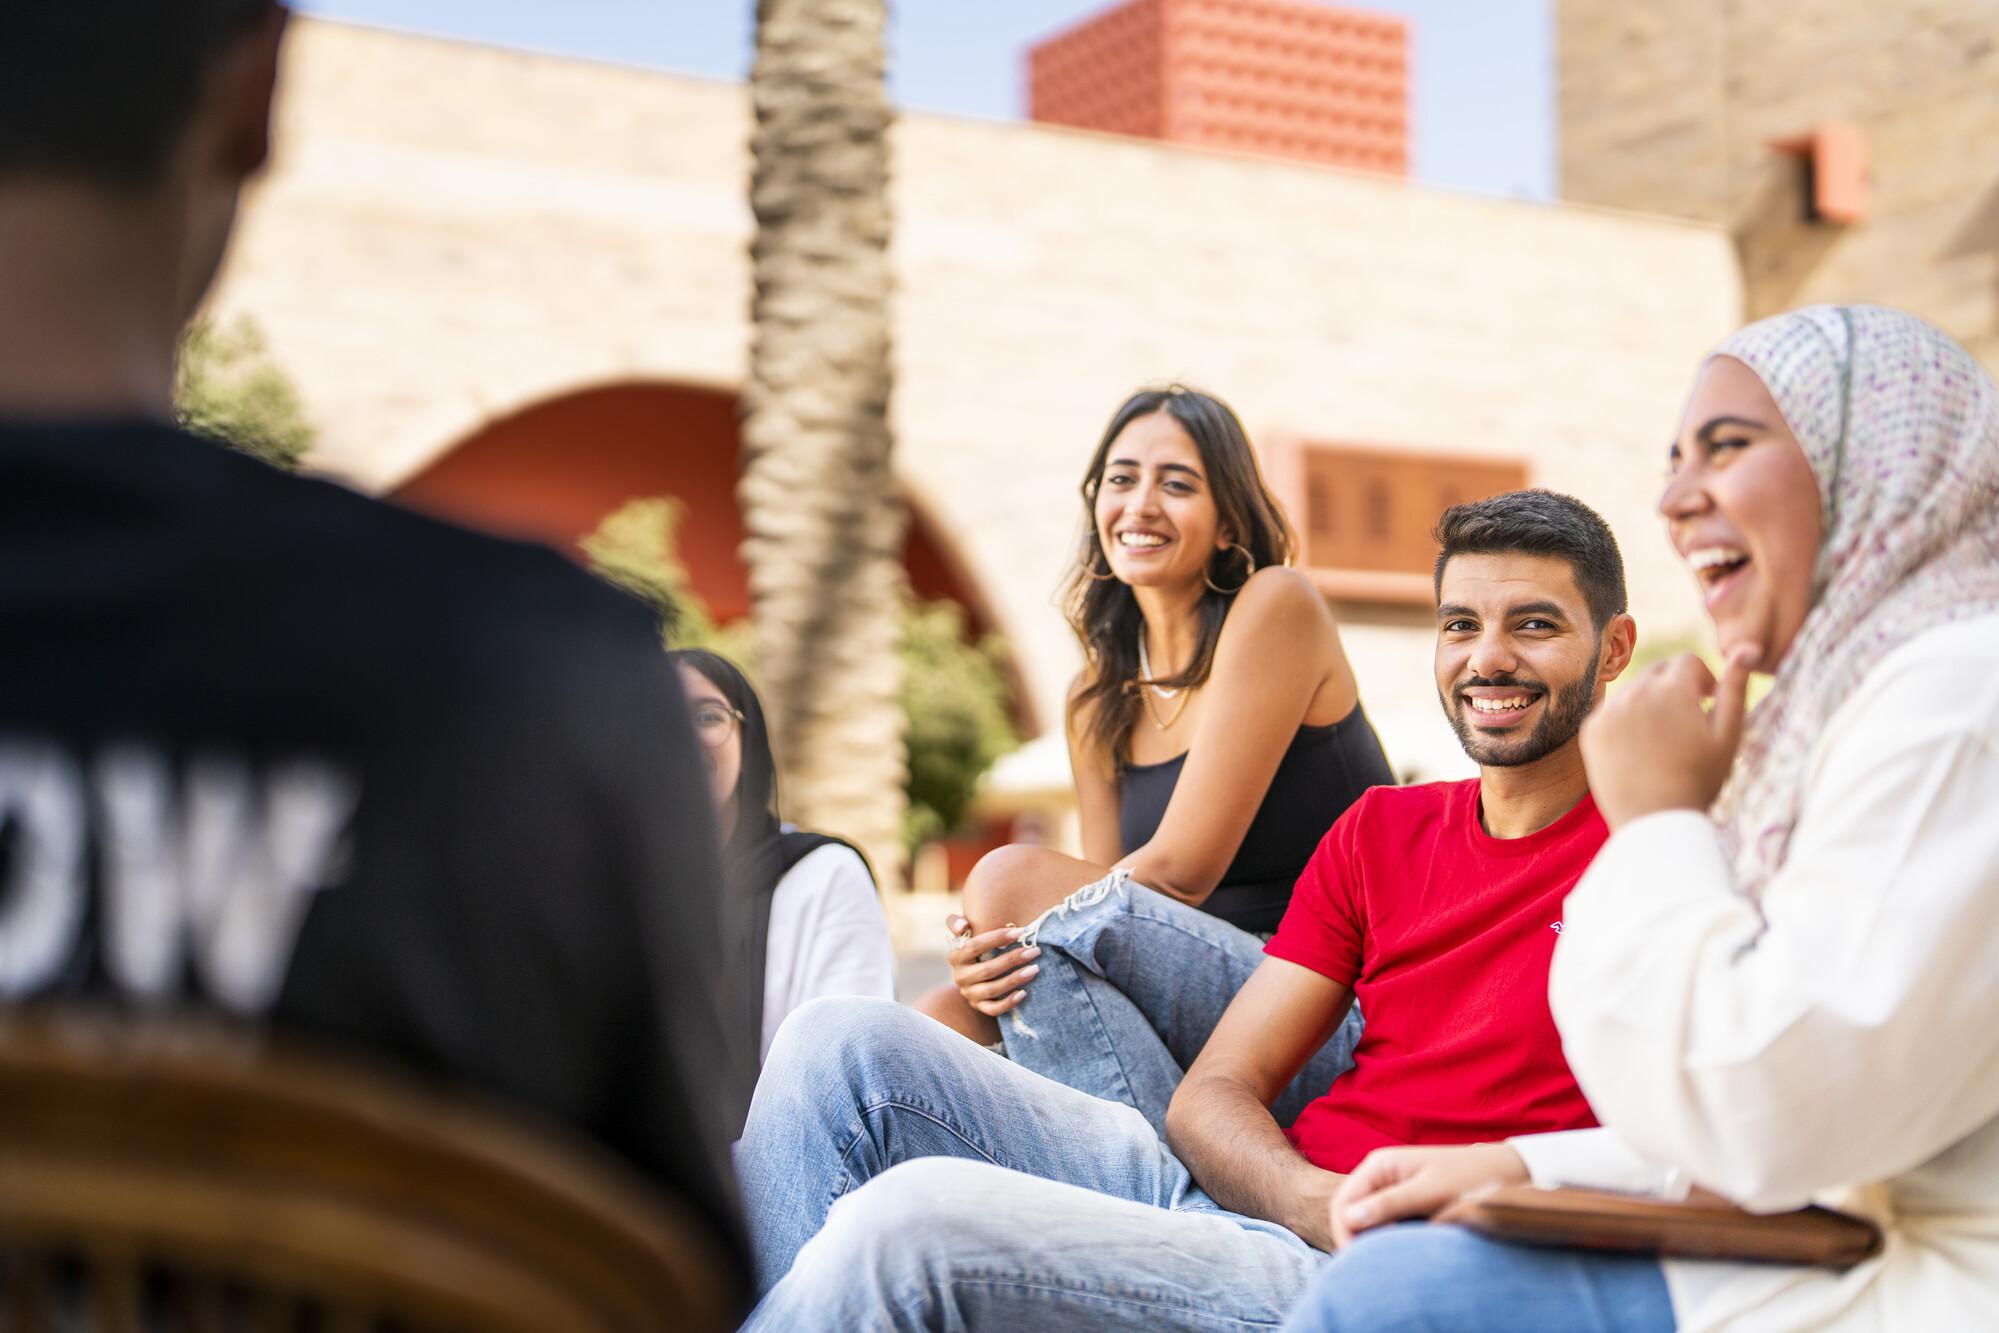 group of students smiling and talking in AUC campus